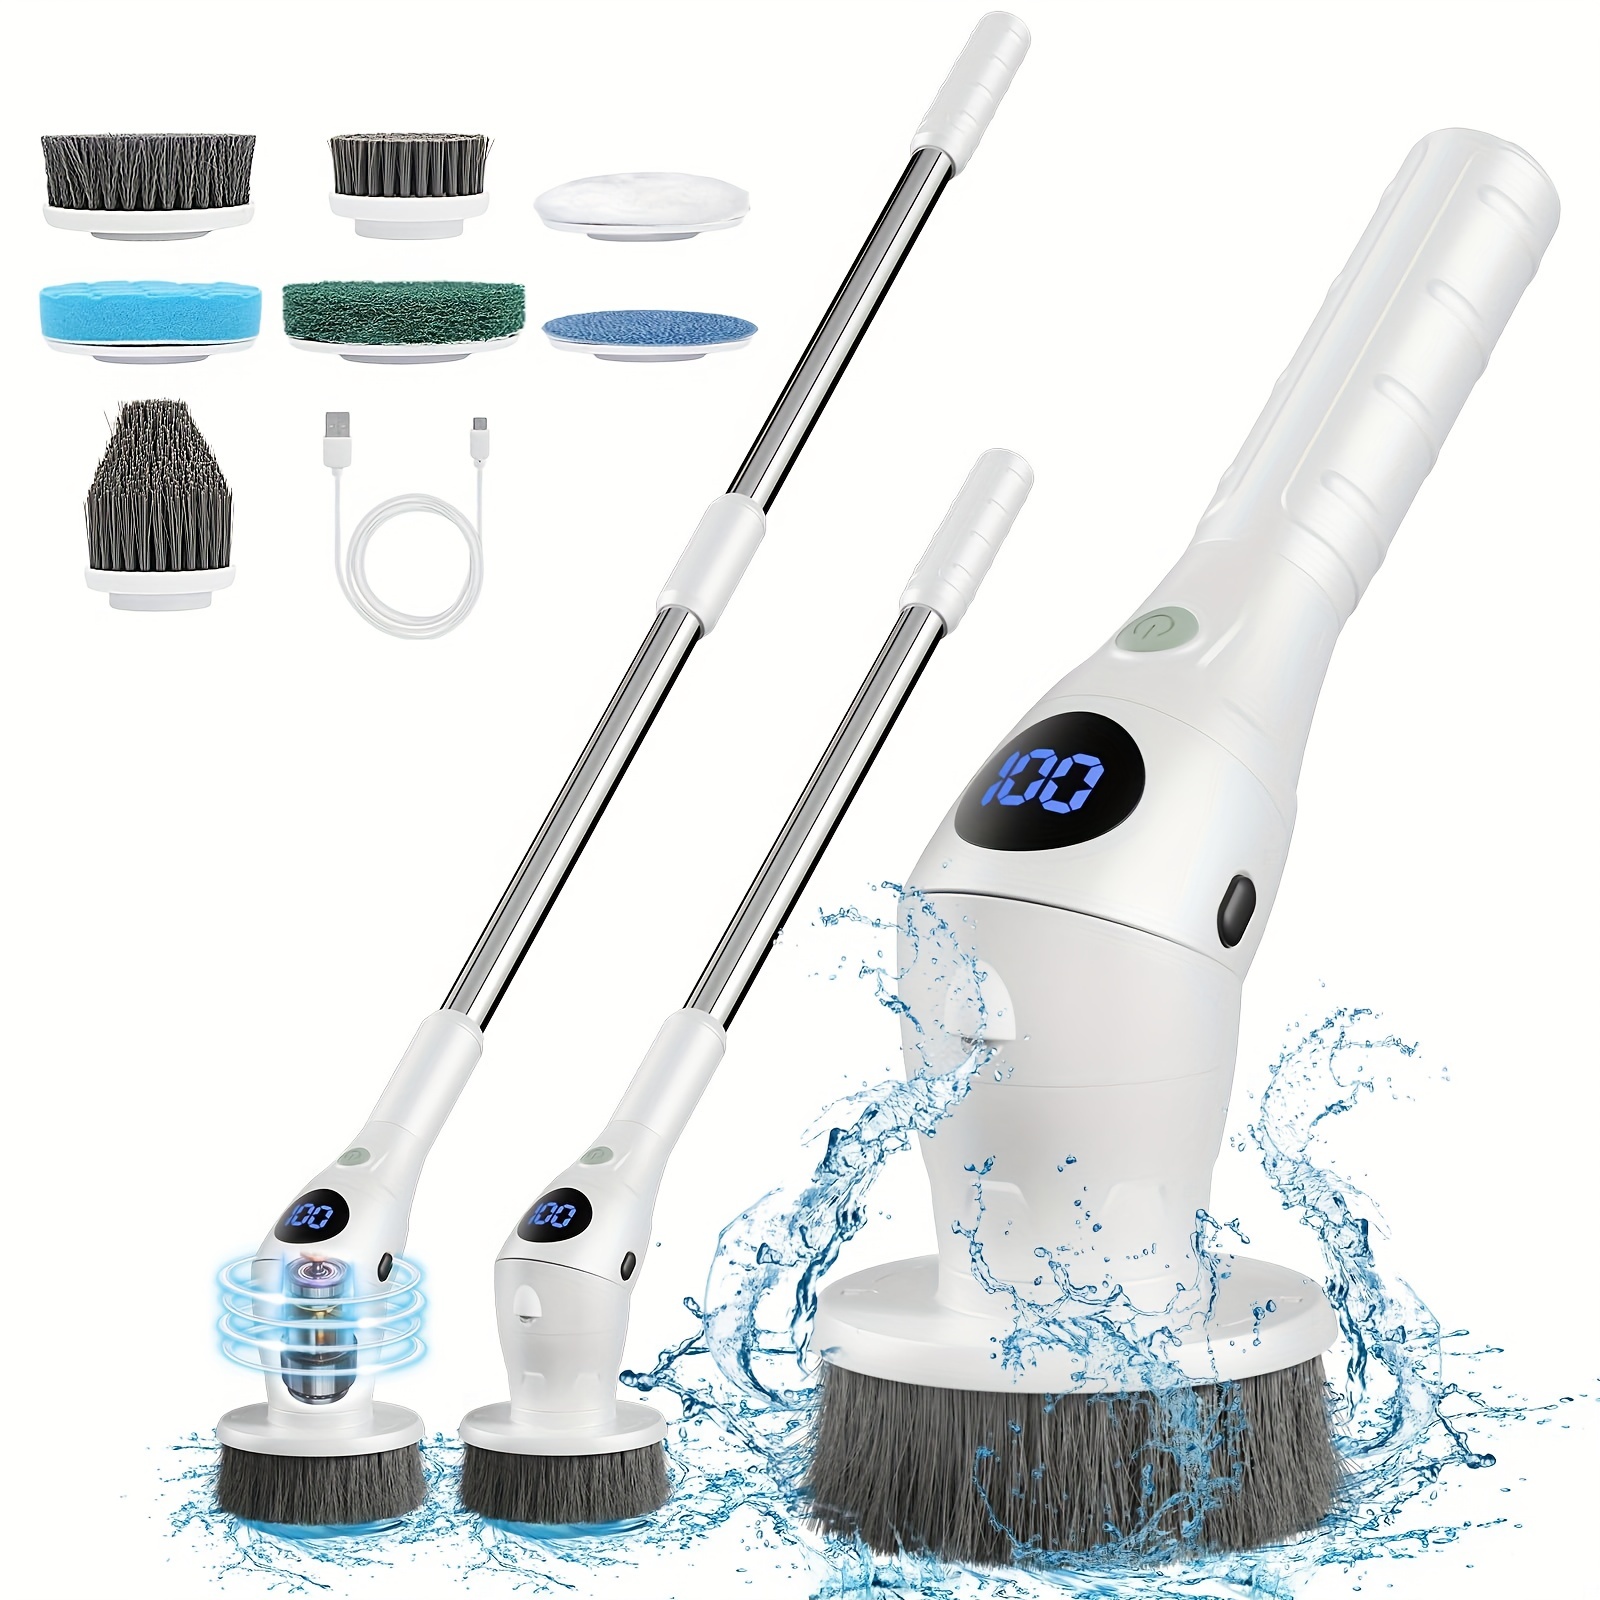 1set, Multifunctional Electric Cleaning Brush Tool Set, 3 Electric Cleaning  Brushes With Brush Heads, Rechargeable Waterproof Electric Brush, Shower B